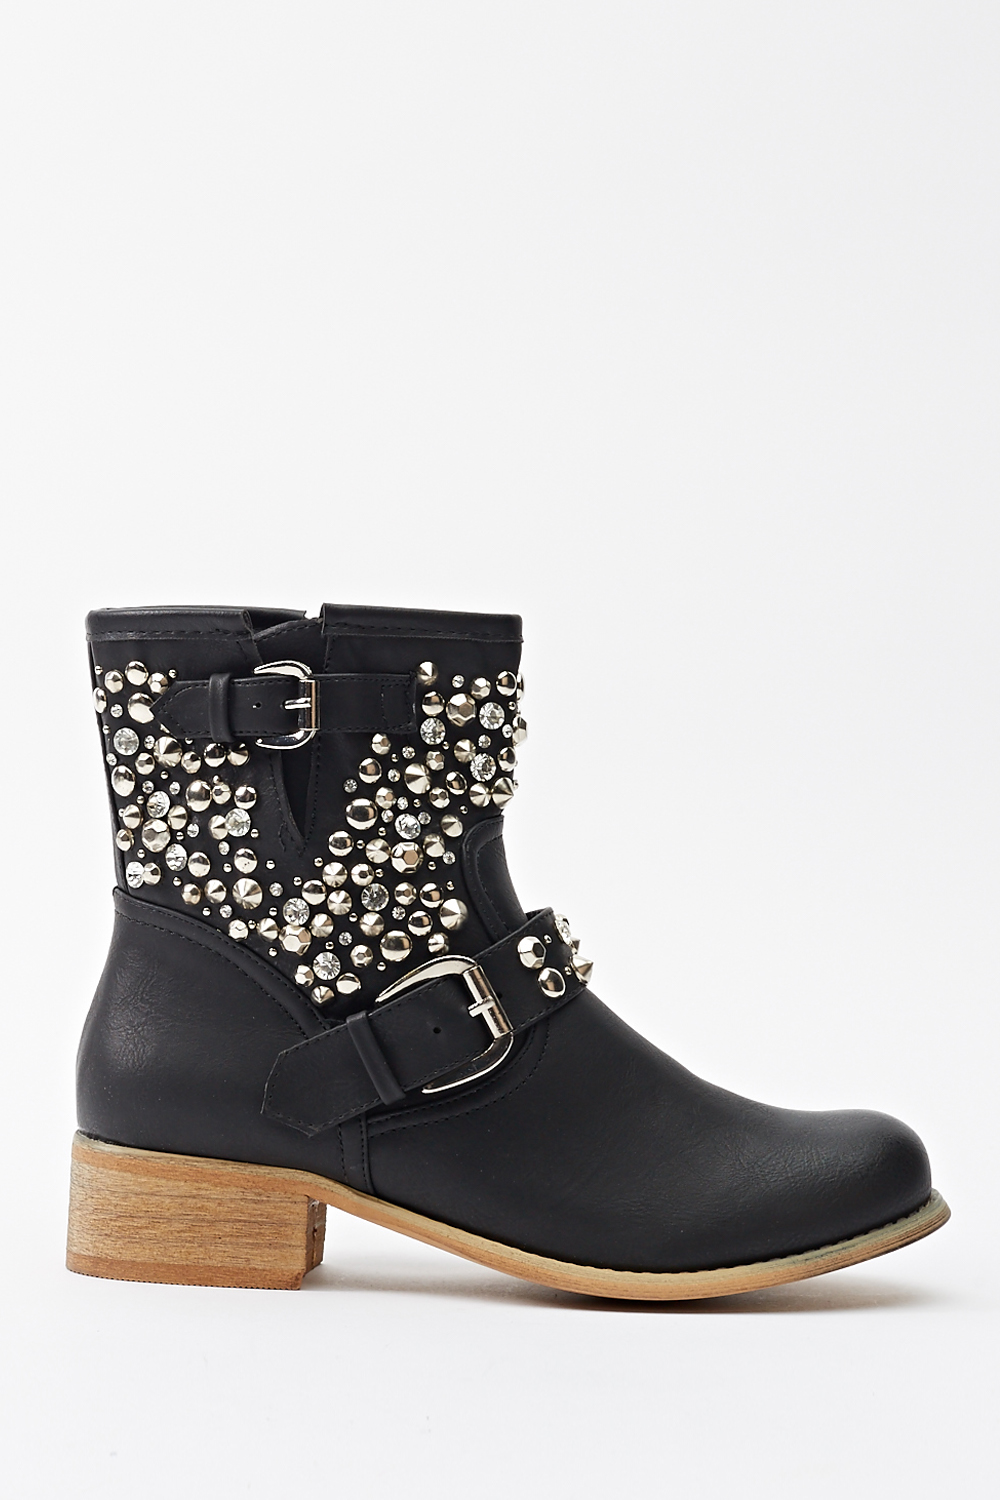 Studded Camel Ankle Boots - Just £5